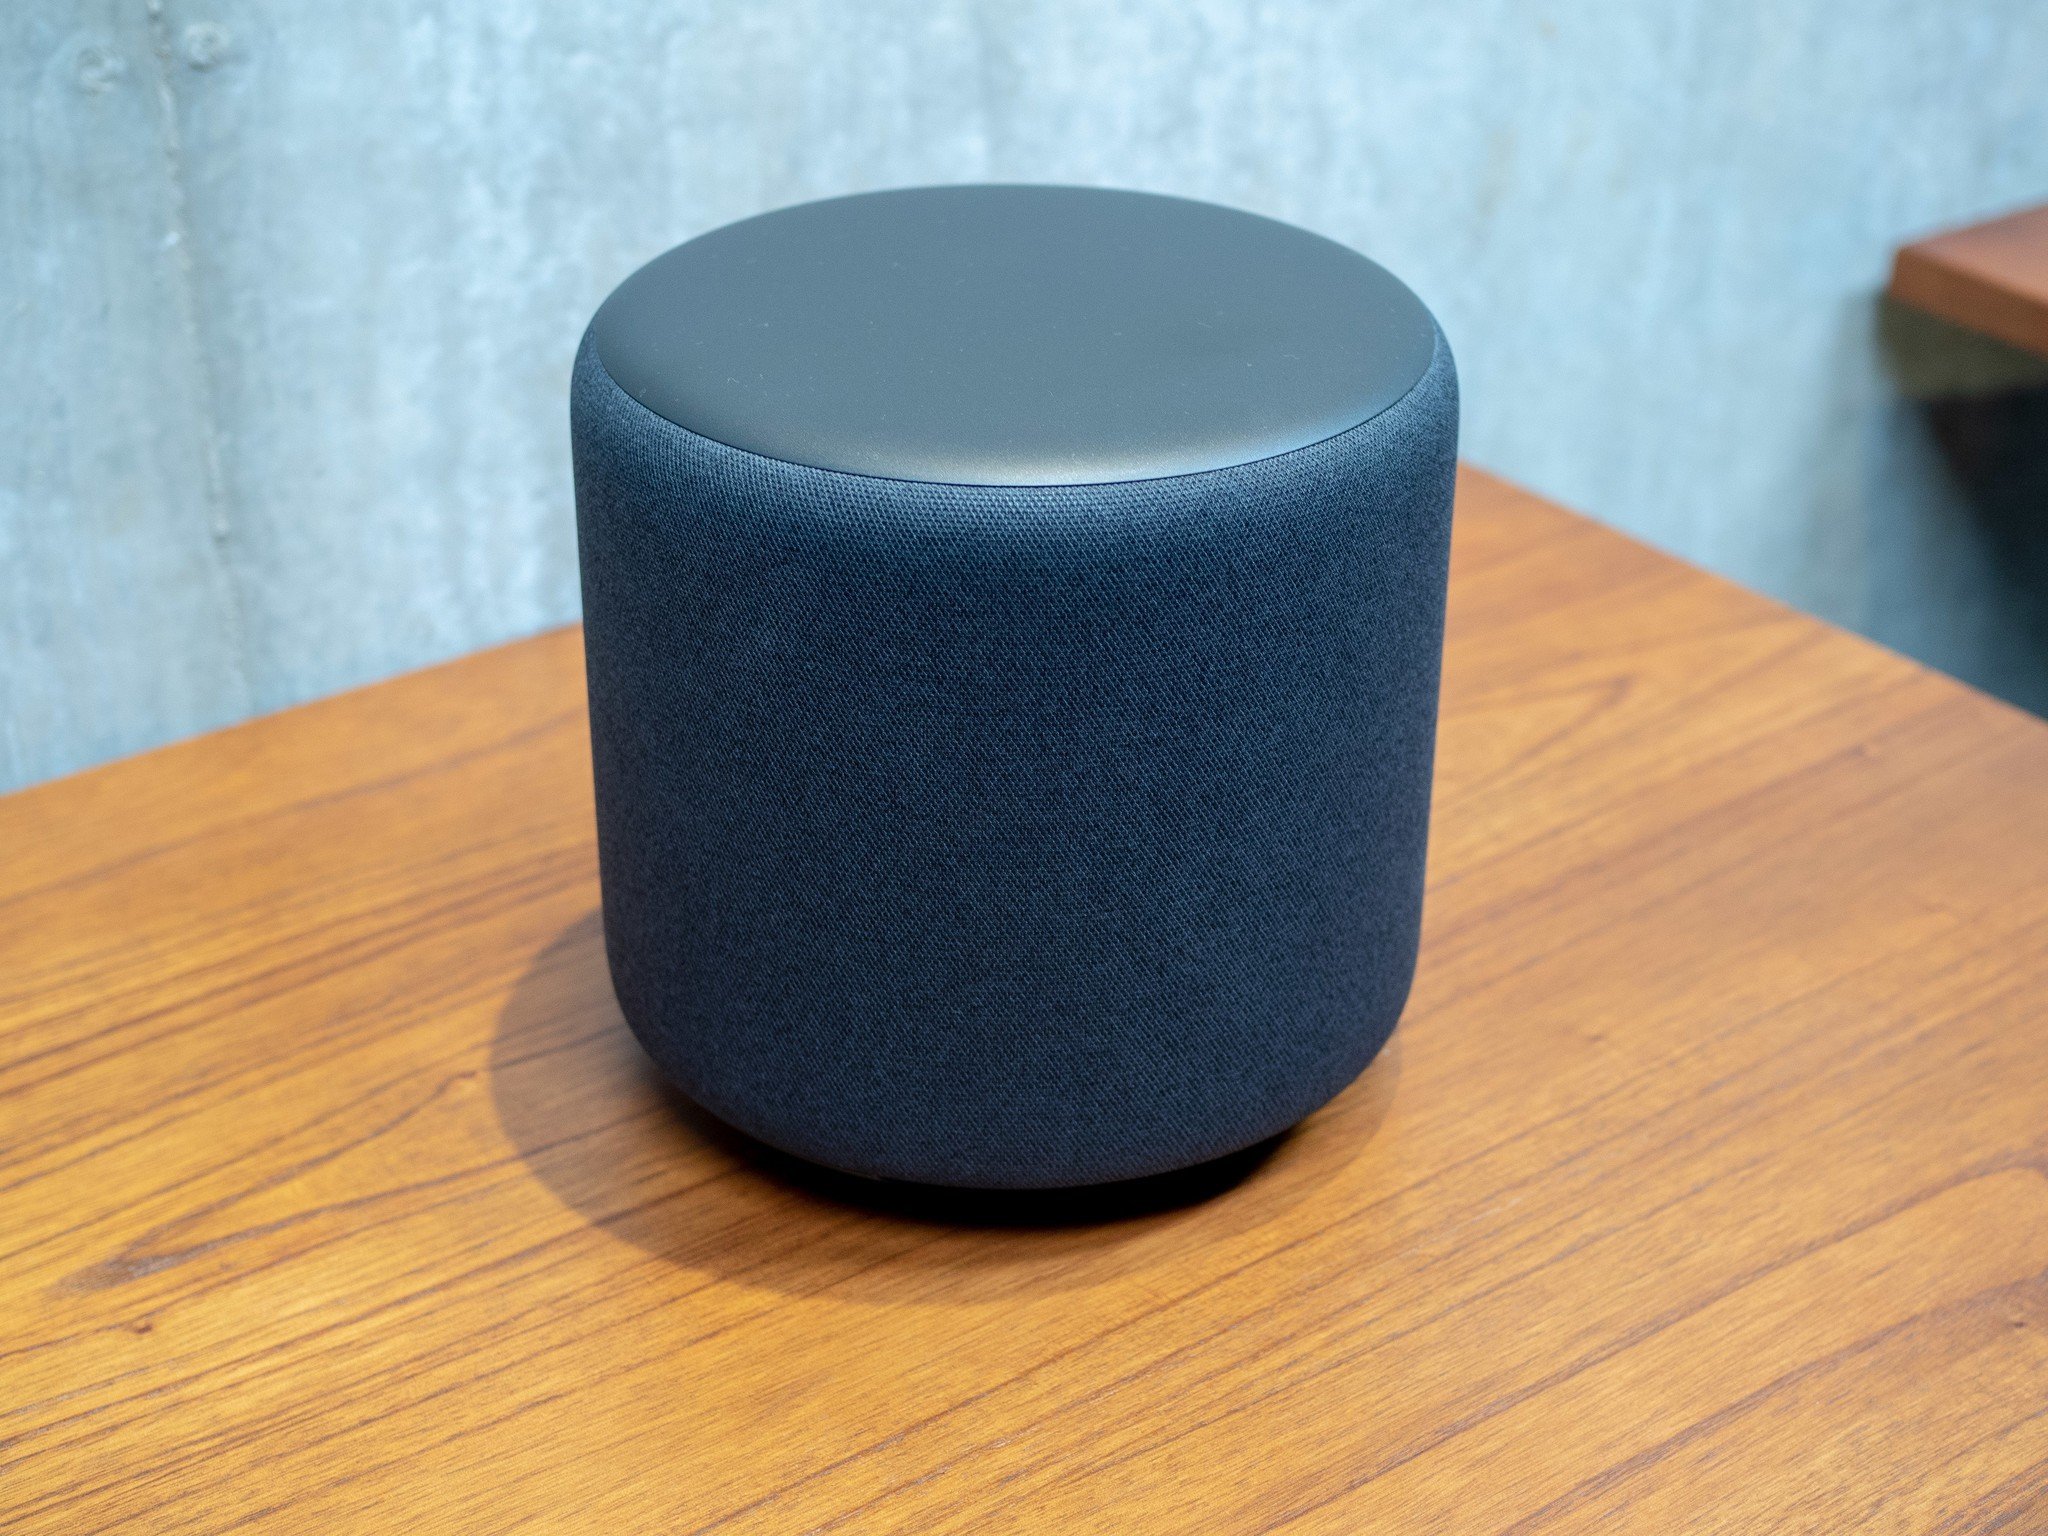 The Echo Studio smart speaker and Echo Sub are bundled together